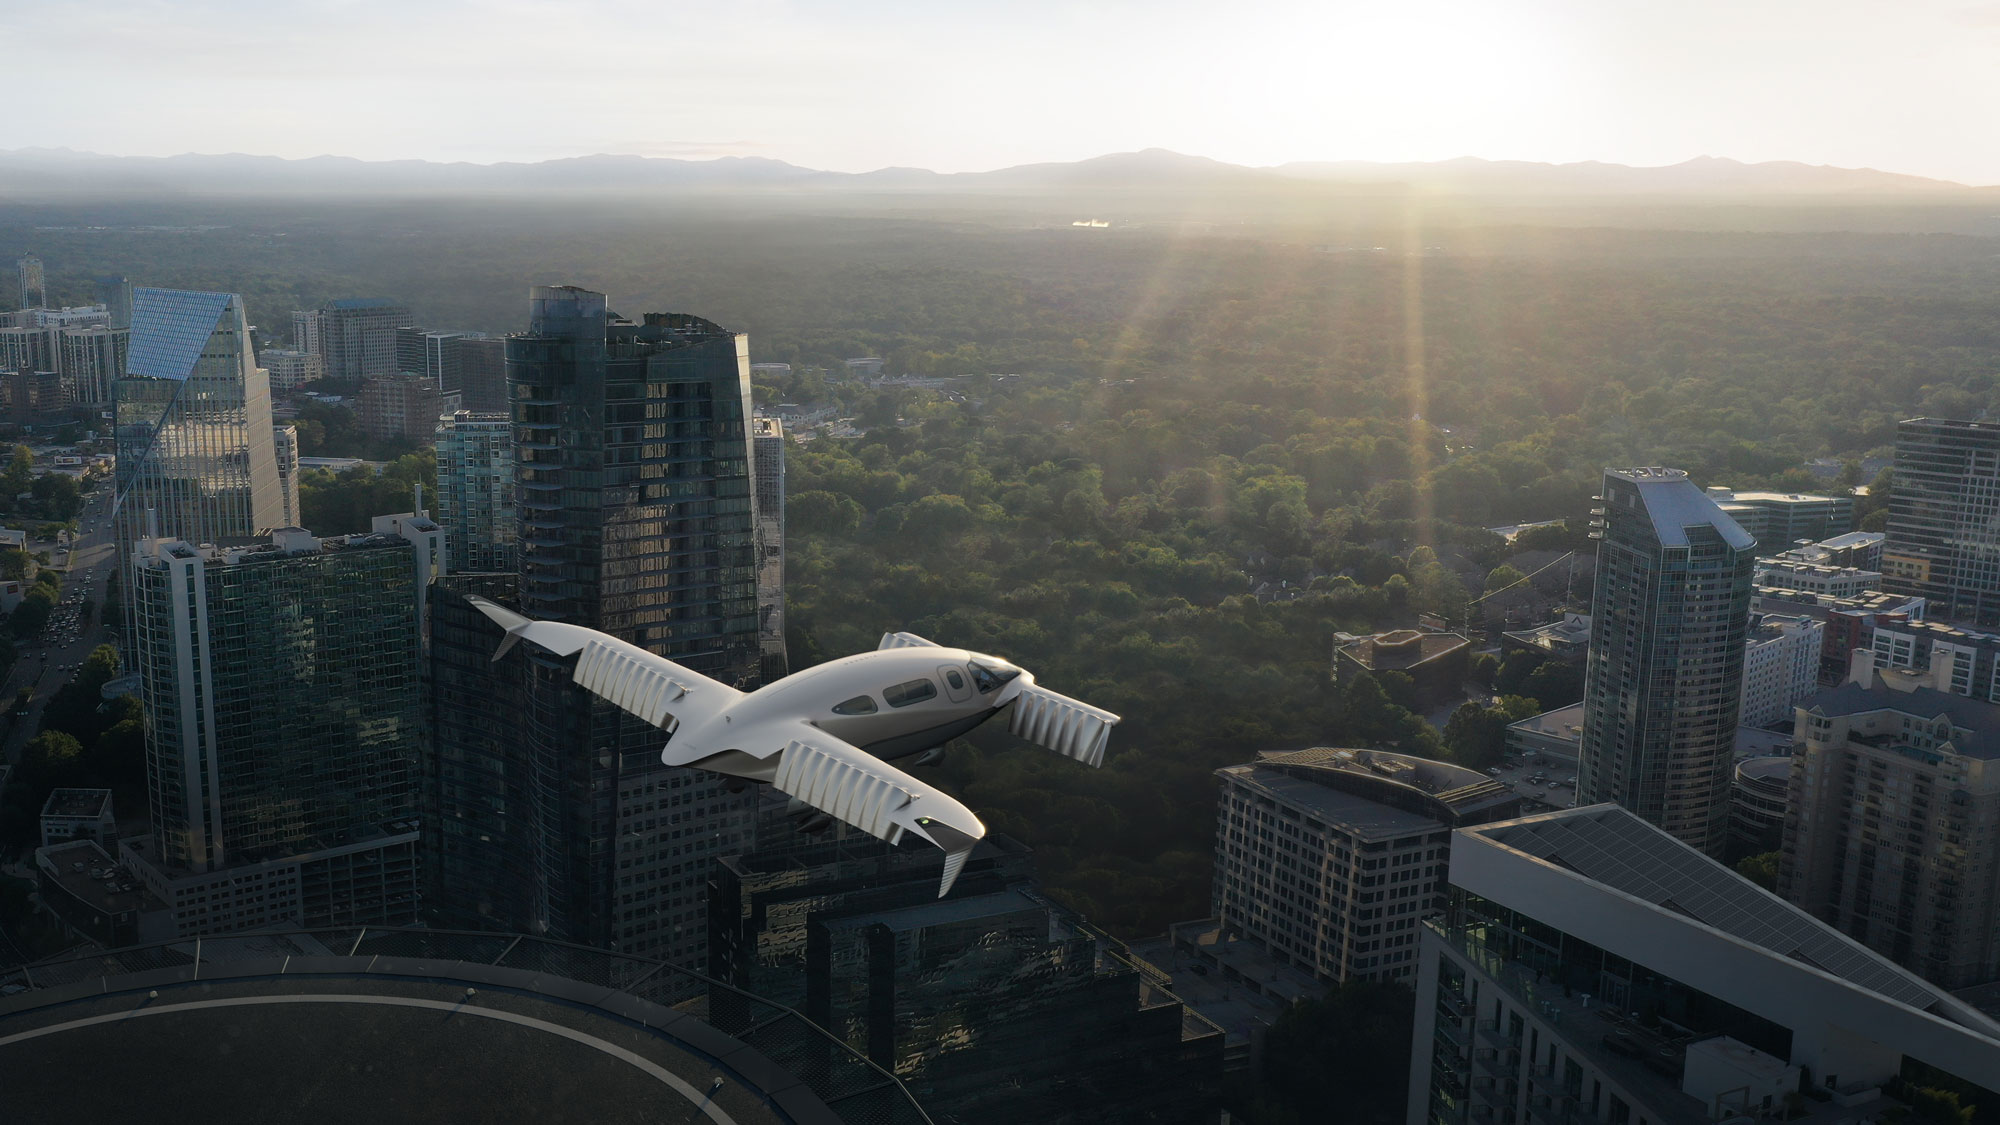 Lilium expands into UK market with eVolare, signs binding contract including pre-delivery payment for up to 20 aircraft